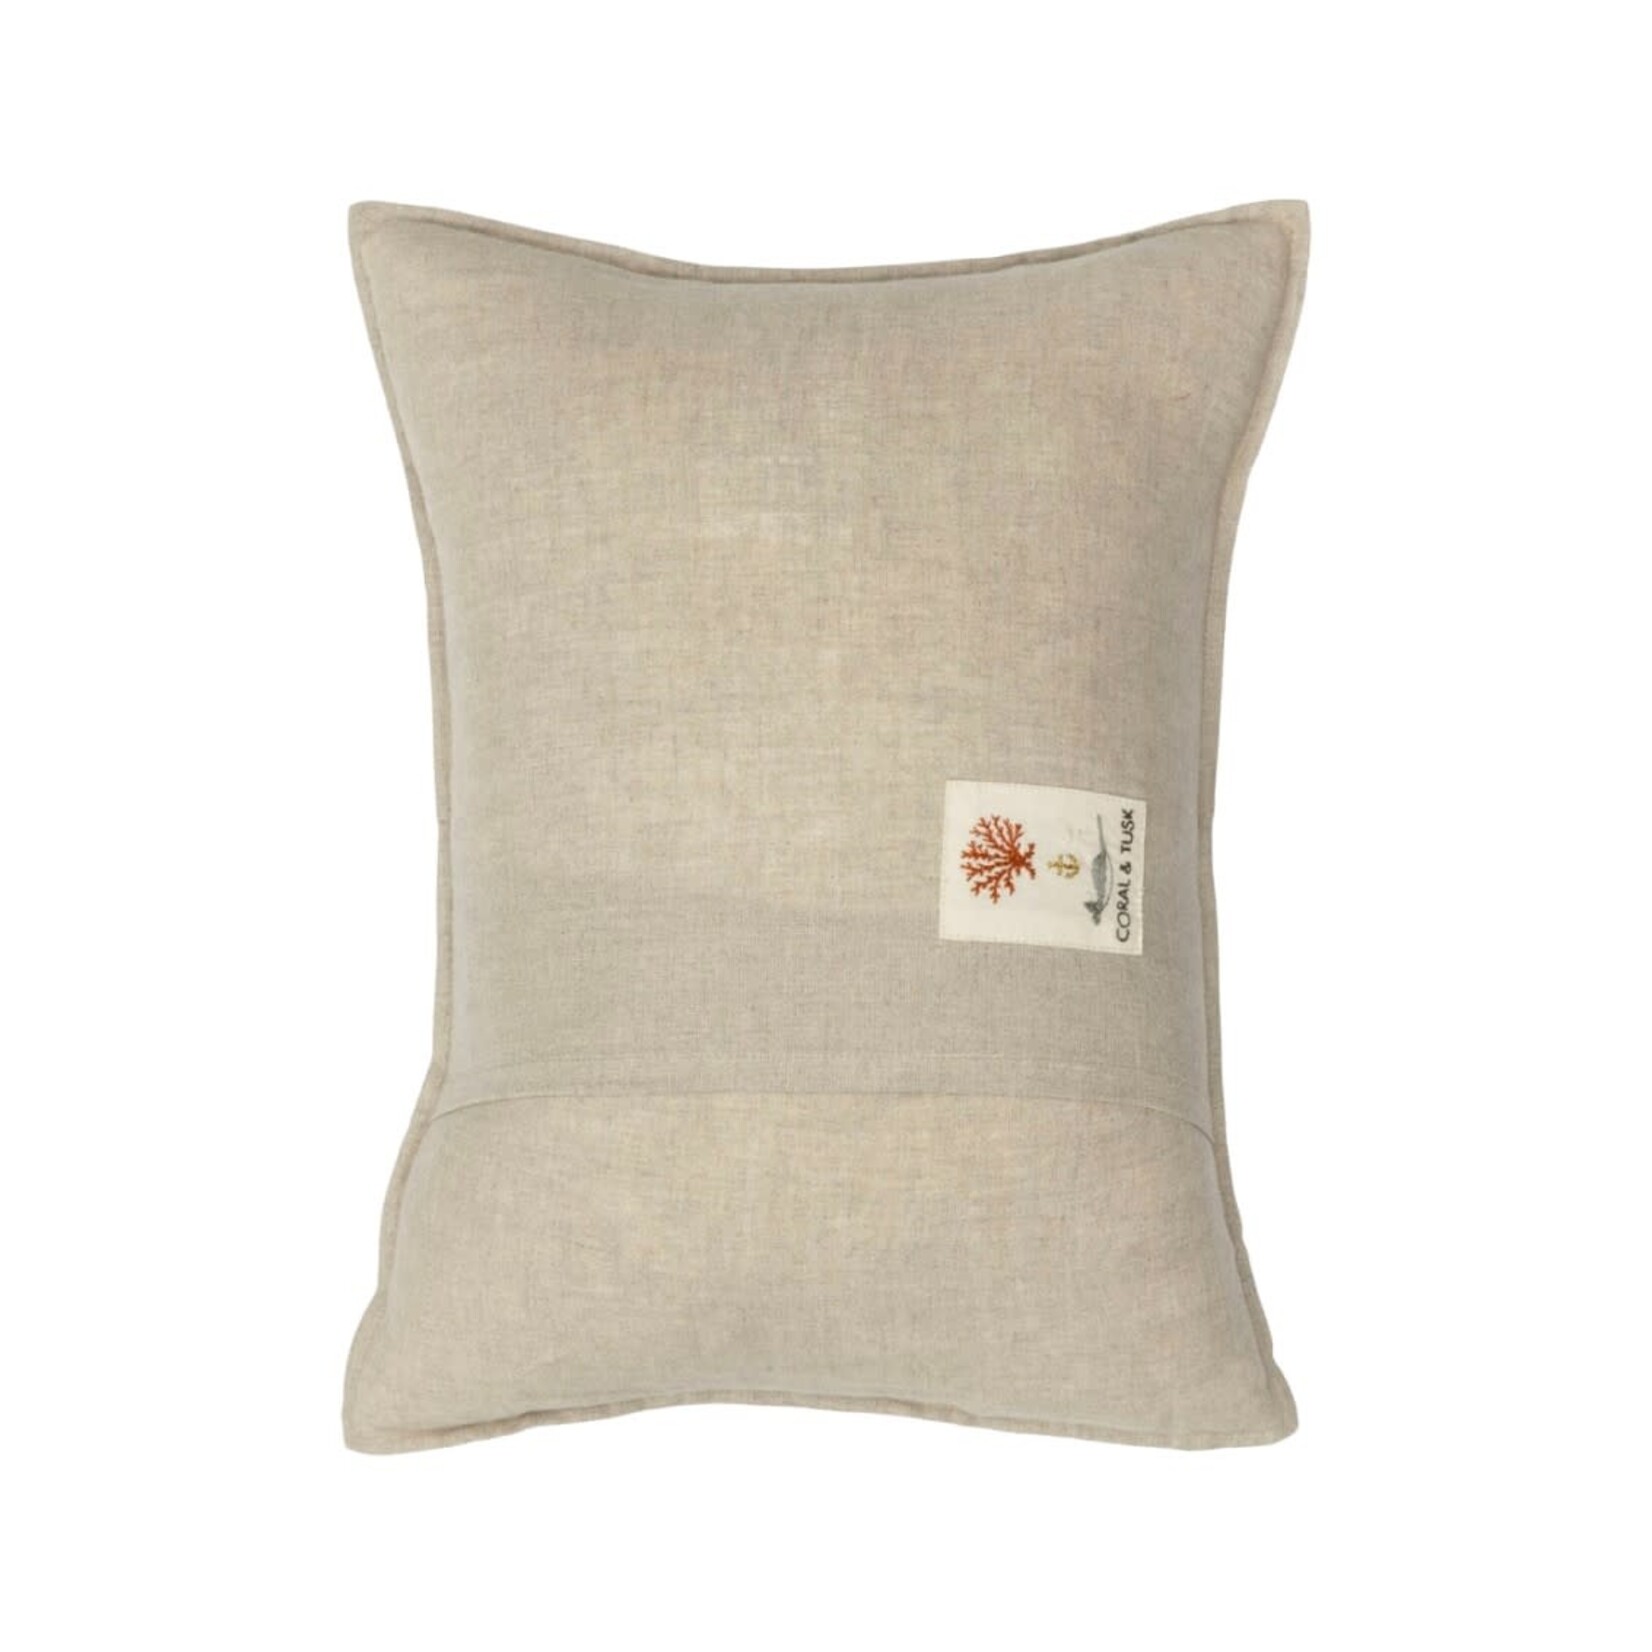 Coral & Tusk Great Grey Owl Pillow